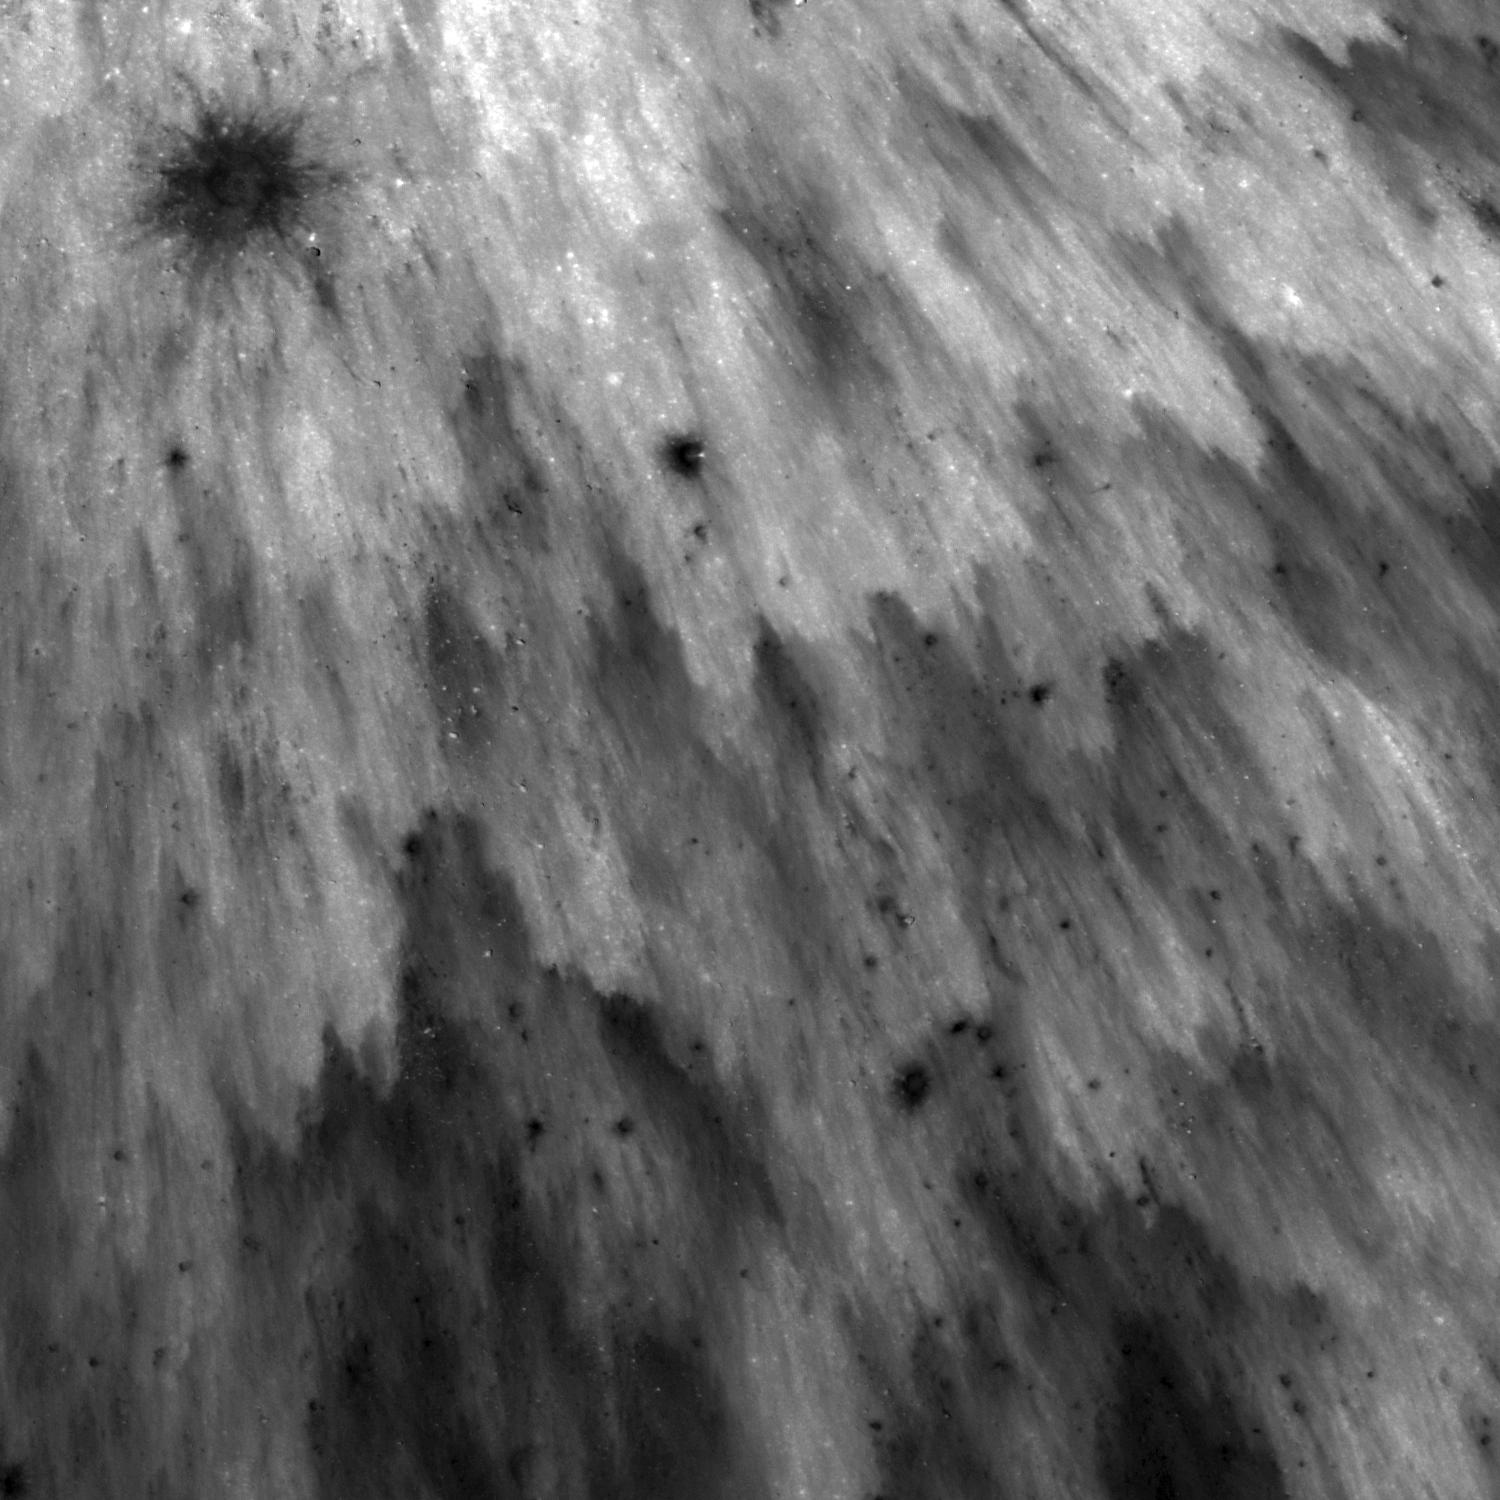 Black and white image showing a spray of impact debris from a moon crater.